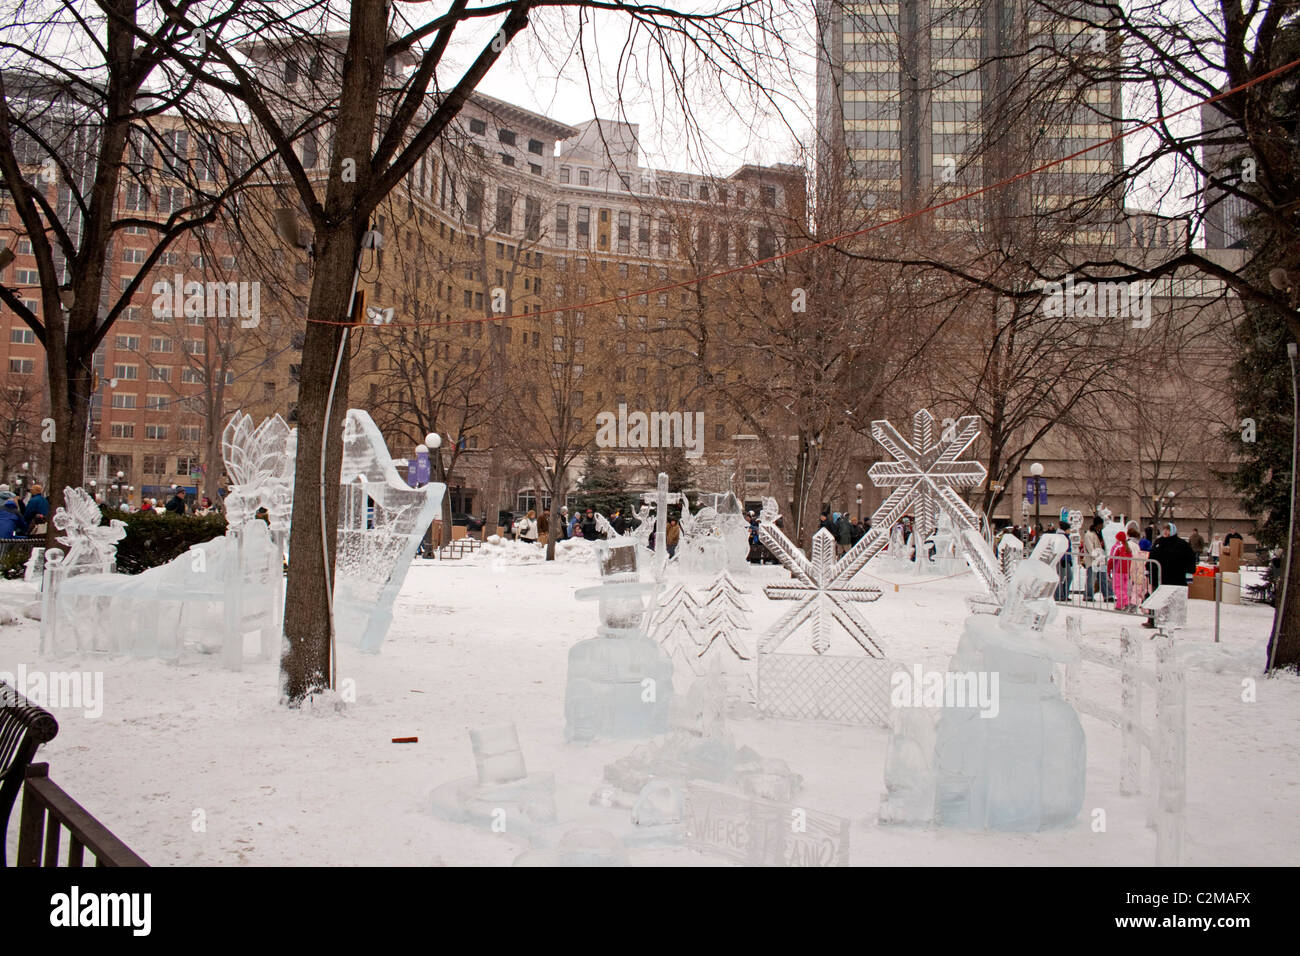 Ice sculptures in Rice Park during Winter Carnival with St Paul Hotel in background. Winter Carnival St Paul Minnesota MN USA Stock Photo